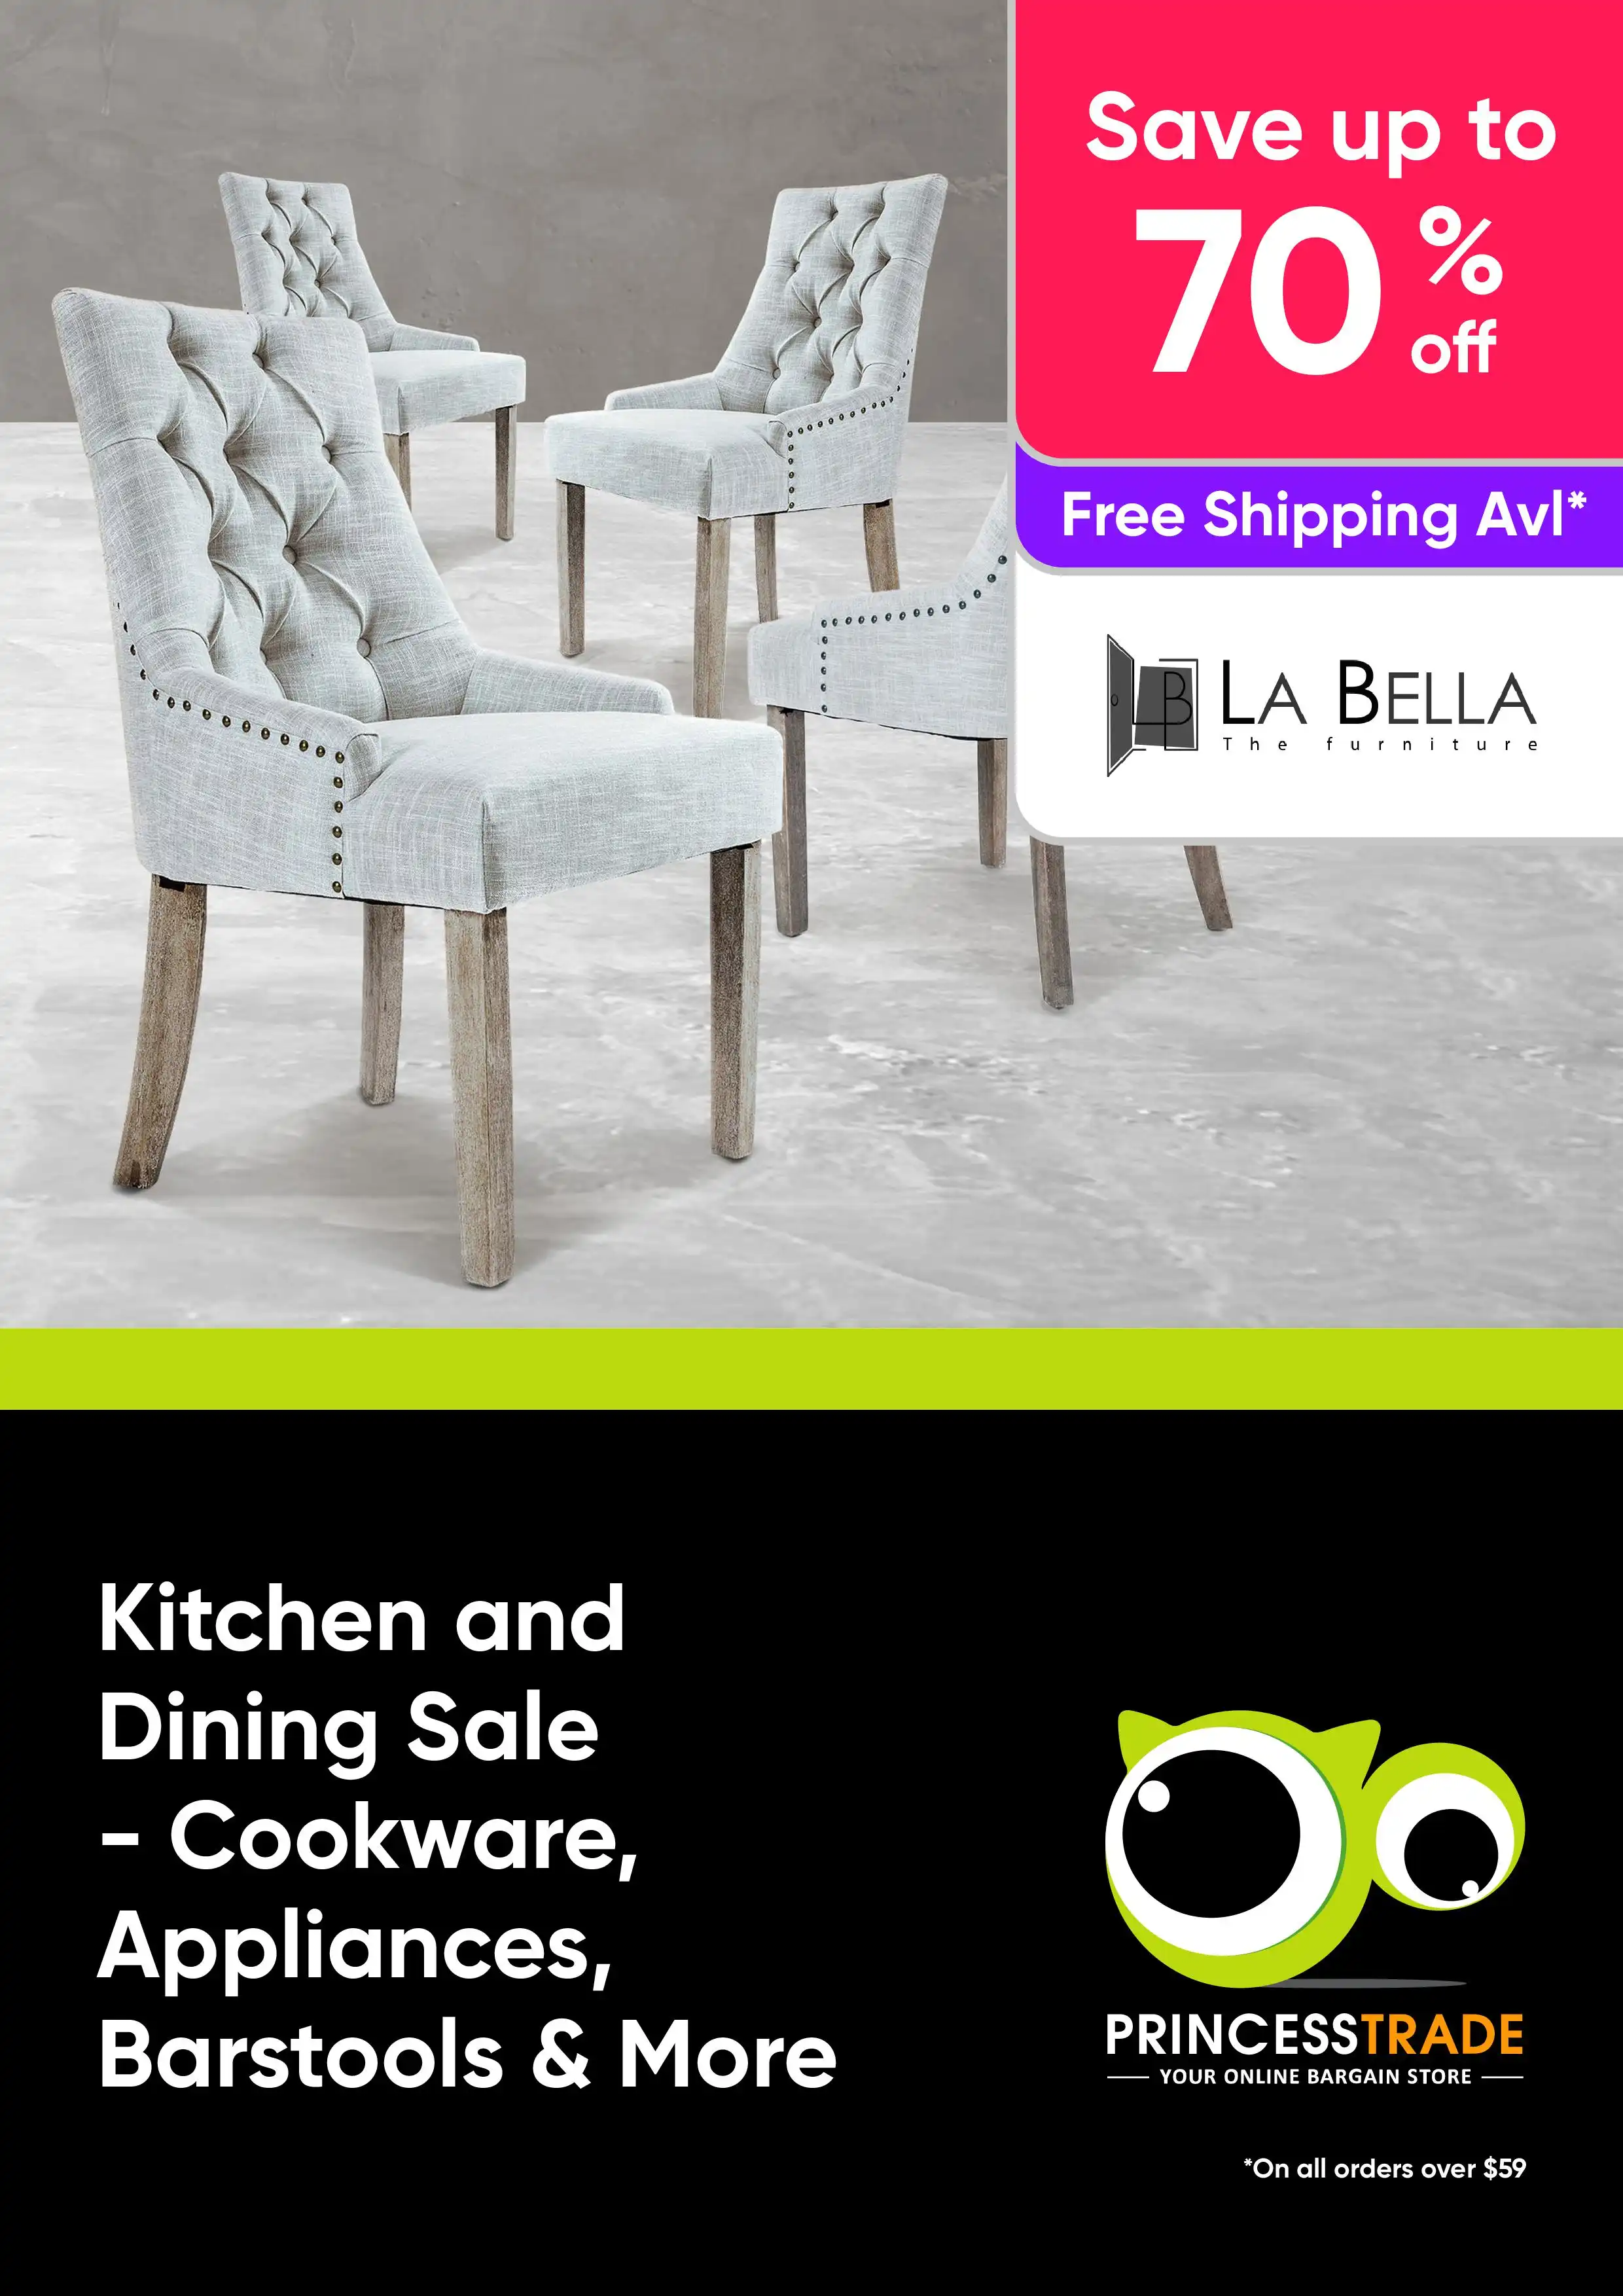 Kitchen and Dining Sale- Save Up To 70% Off Cookware, Appliances, Barstools & More